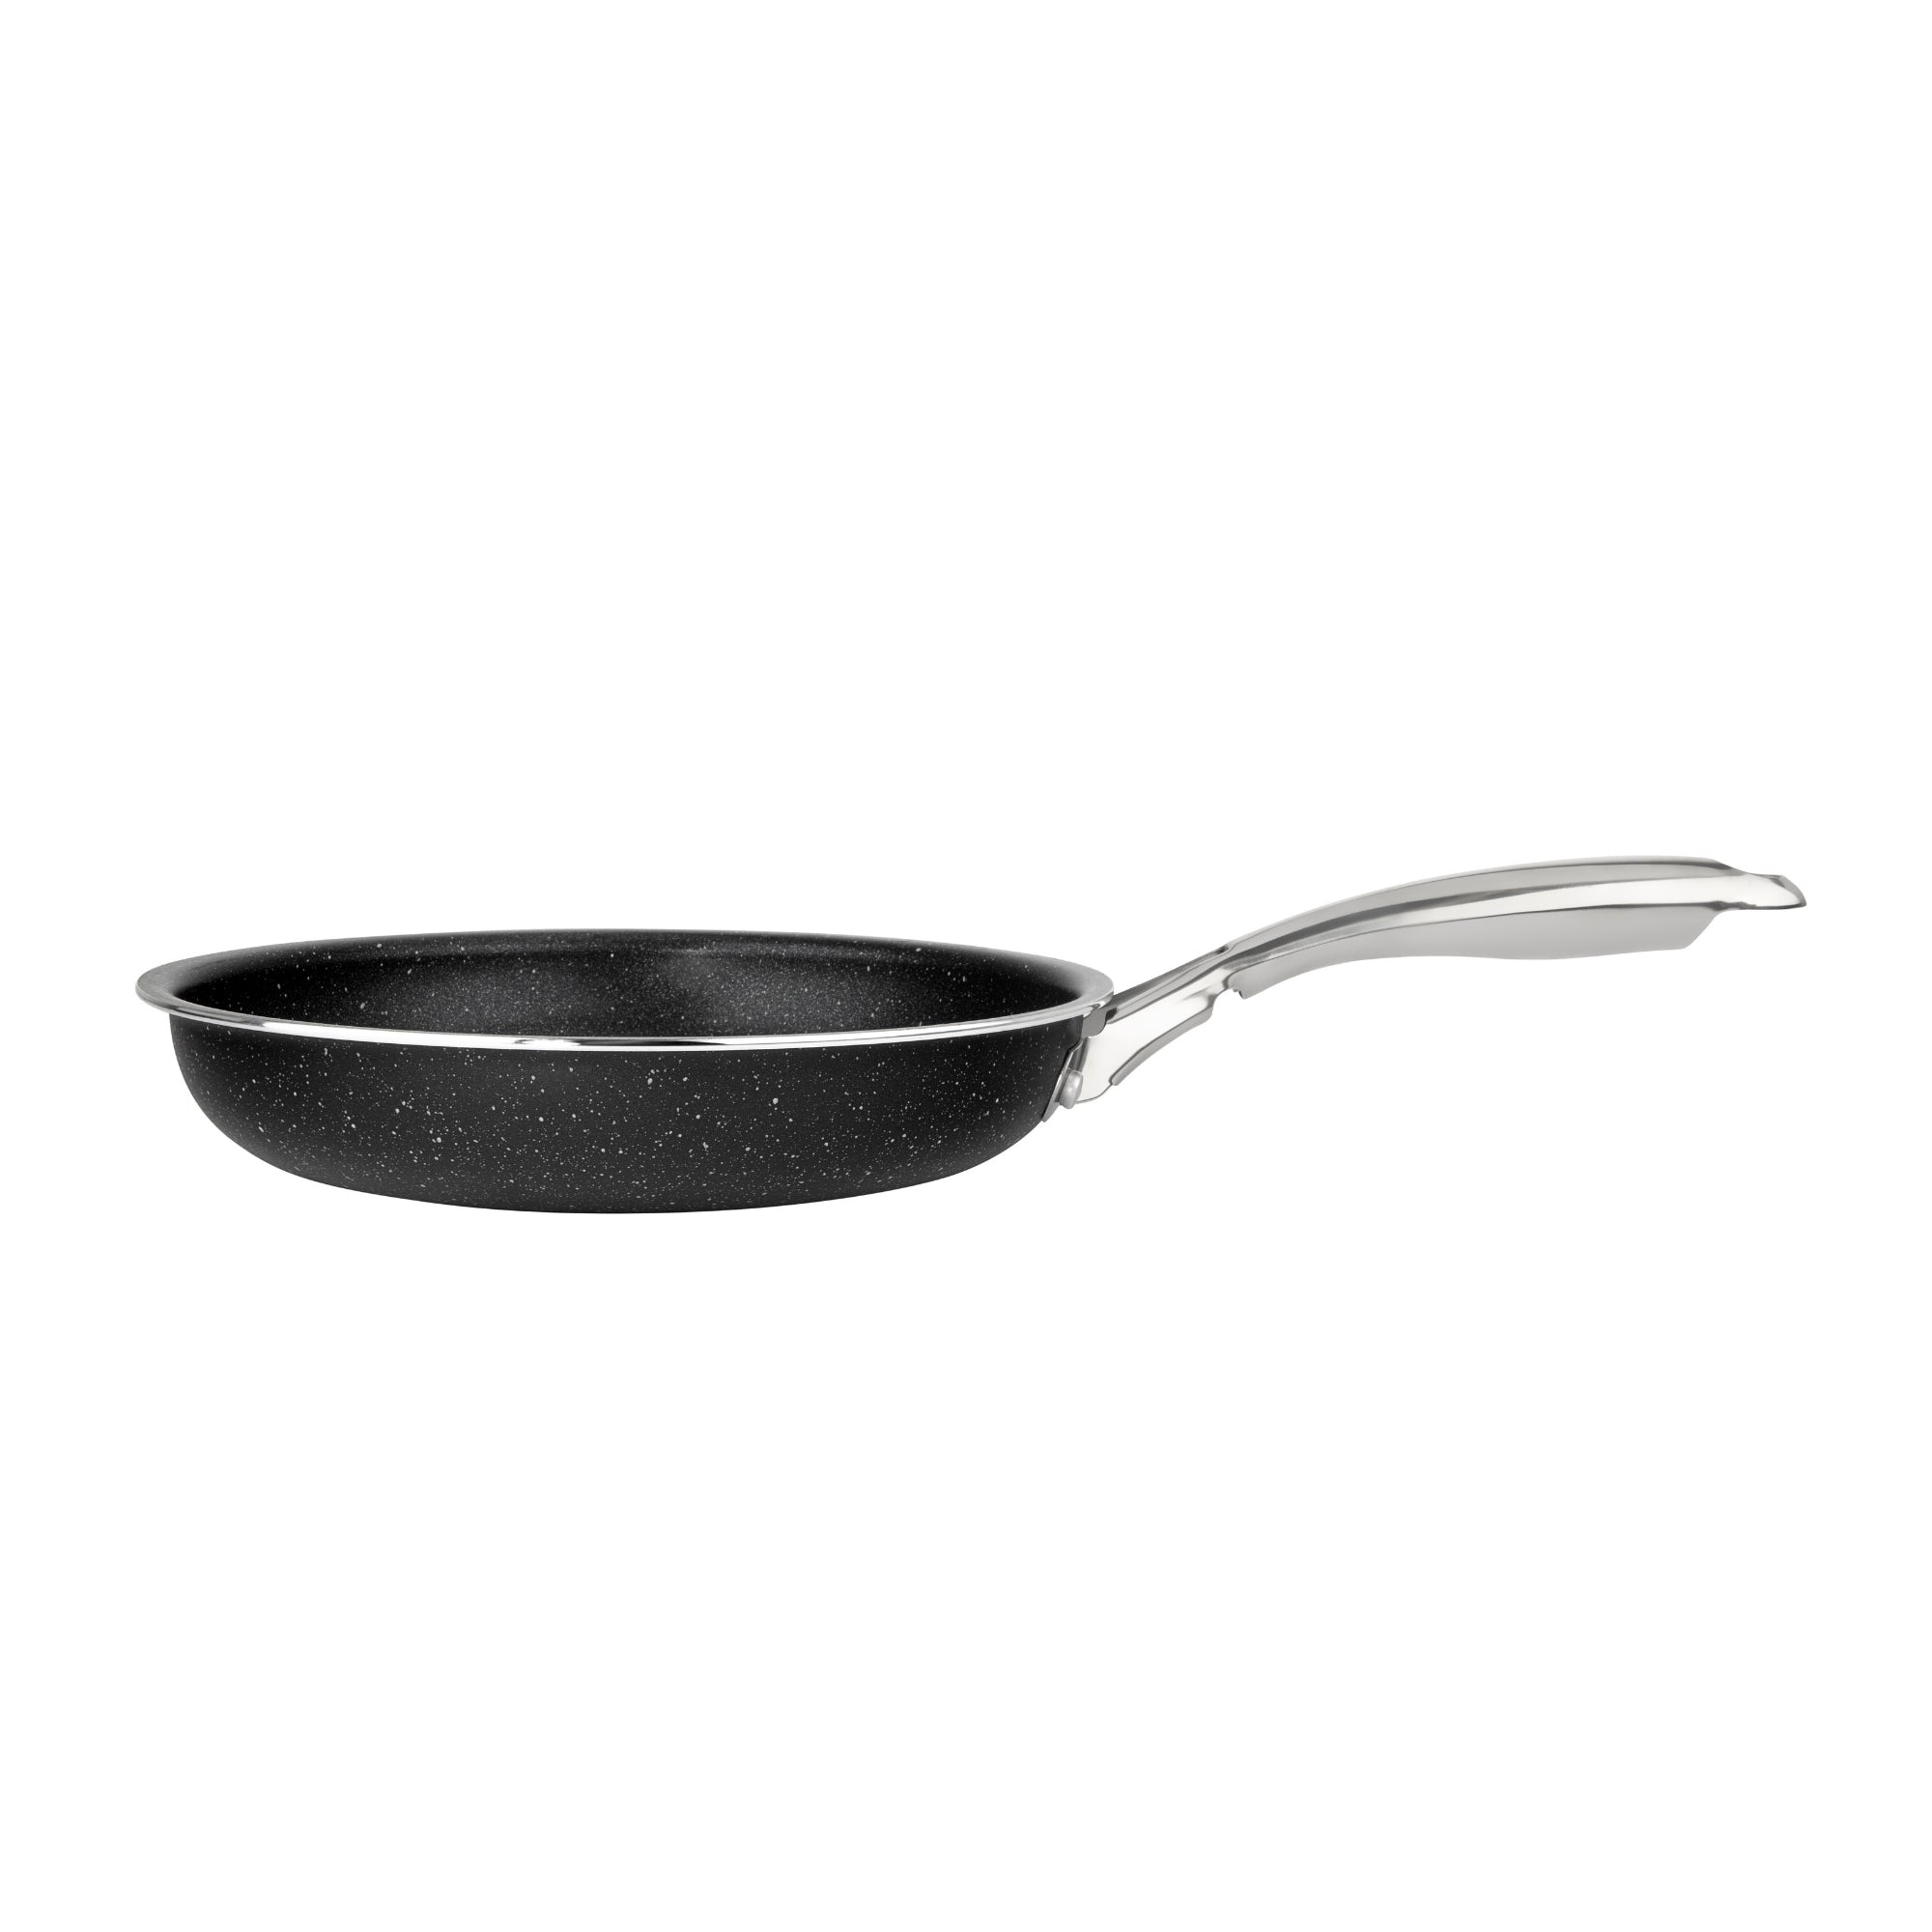 10 Inch Frying Pan With Special Lid - Deluxe Copper Granite Stone